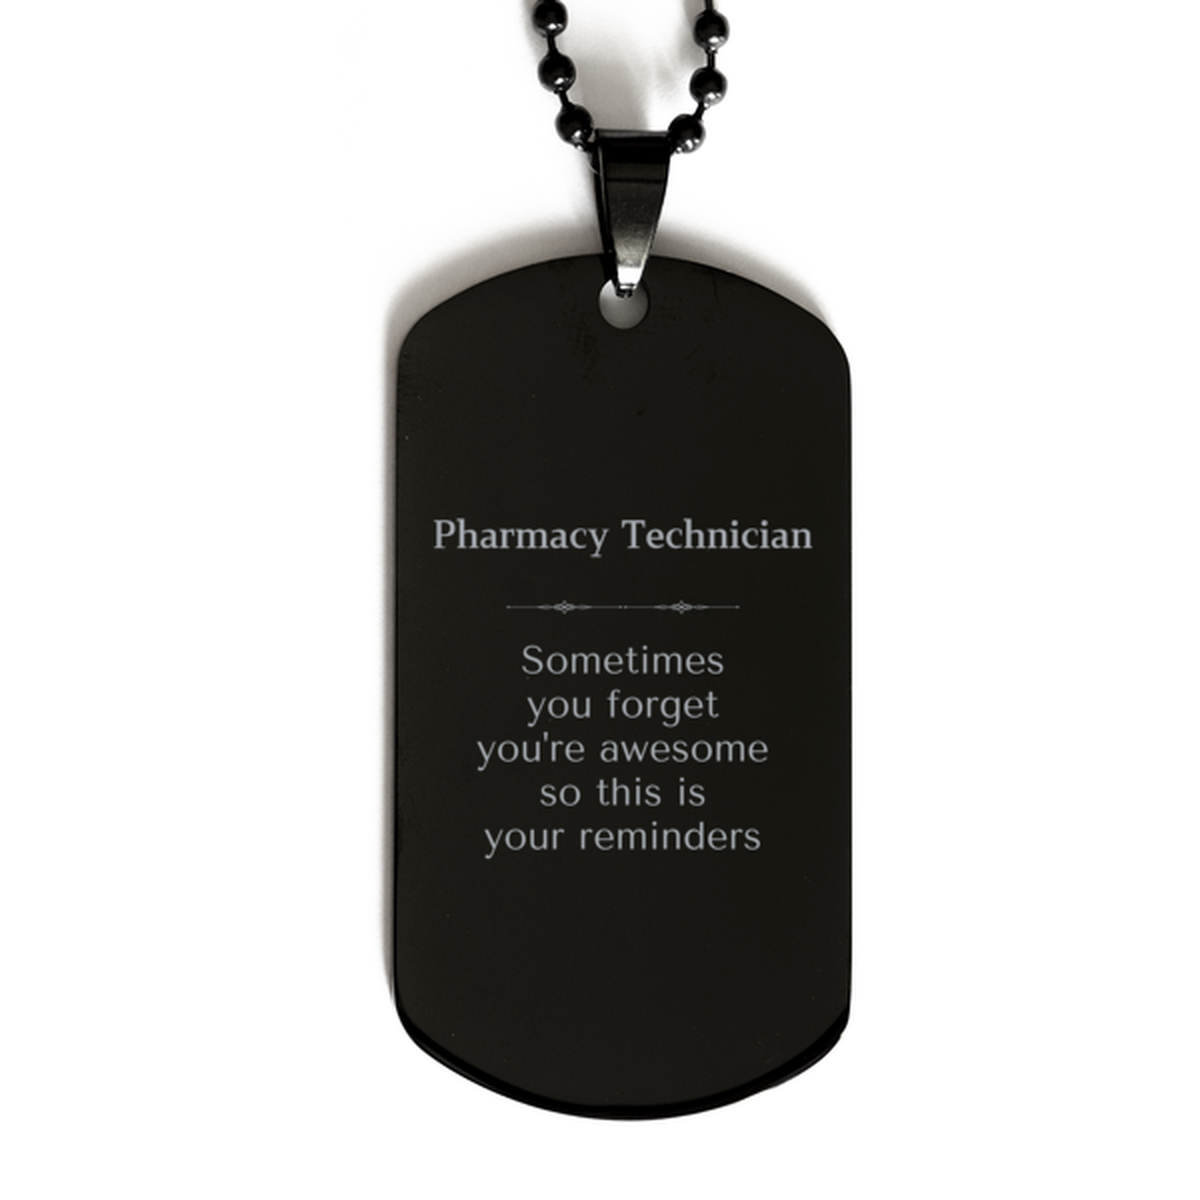 Sentimental Pharmacy Technician Black Dog Tag, Pharmacy Technician Sometimes you forget you're awesome so this is your reminders, Graduation Christmas Birthday Gifts for Pharmacy Technician, Men, Women, Coworkers